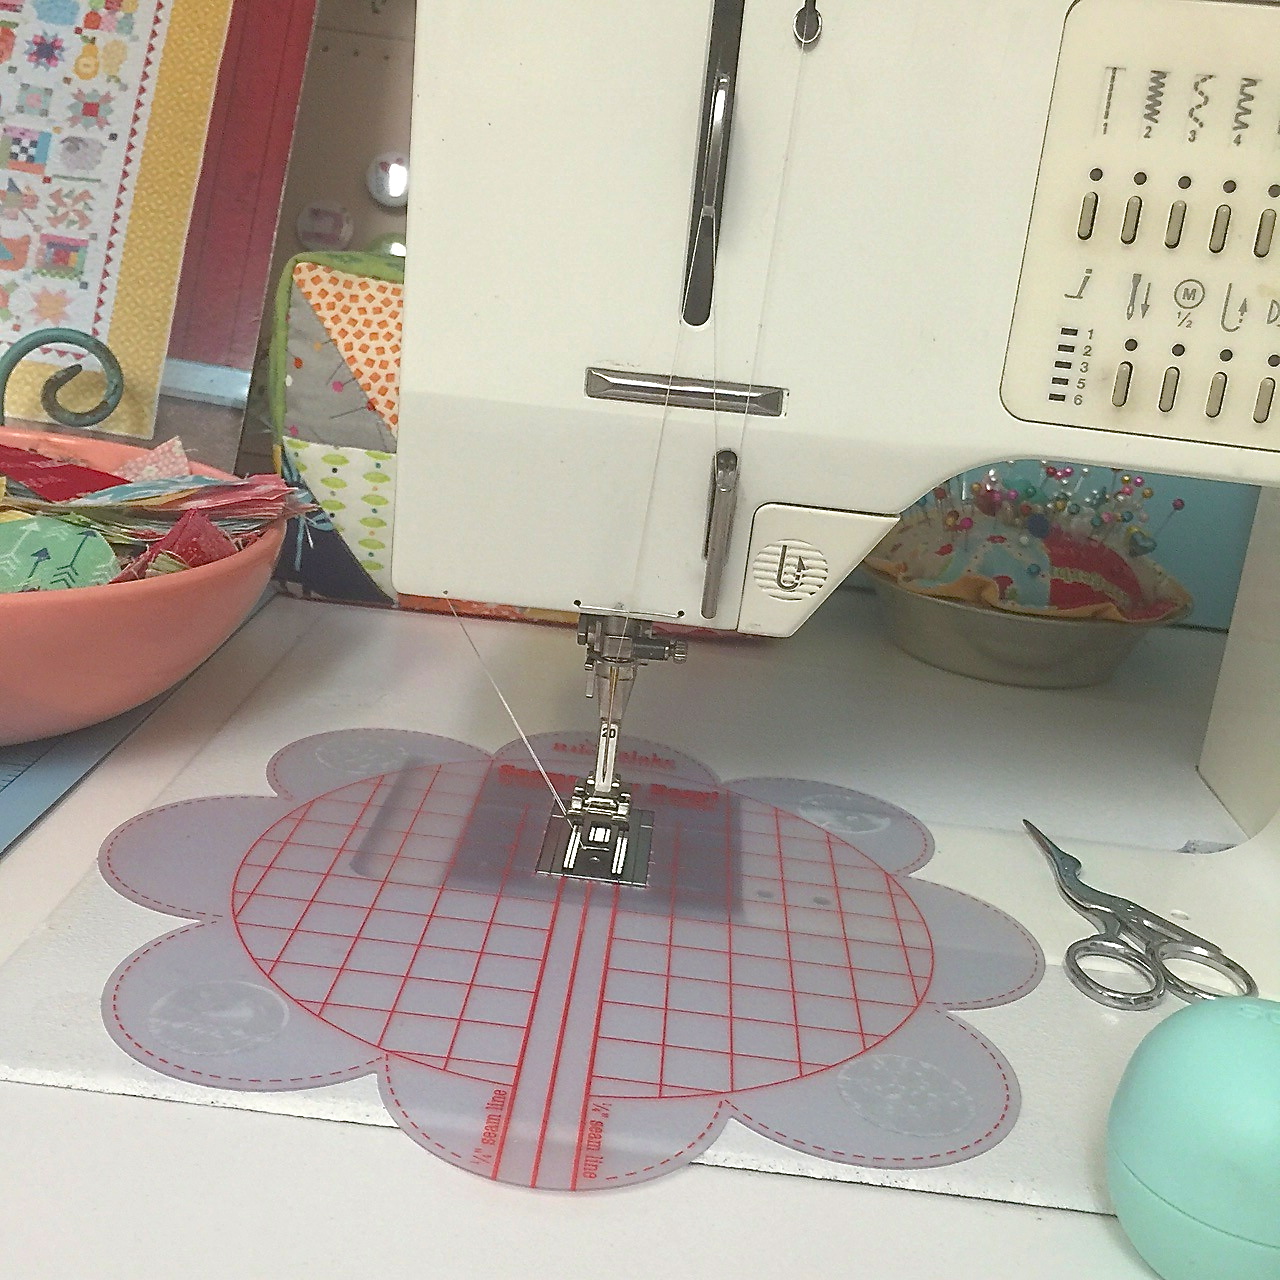 12 Easy Sewing Projects for Kids & Beginners - Diary of a Quilter